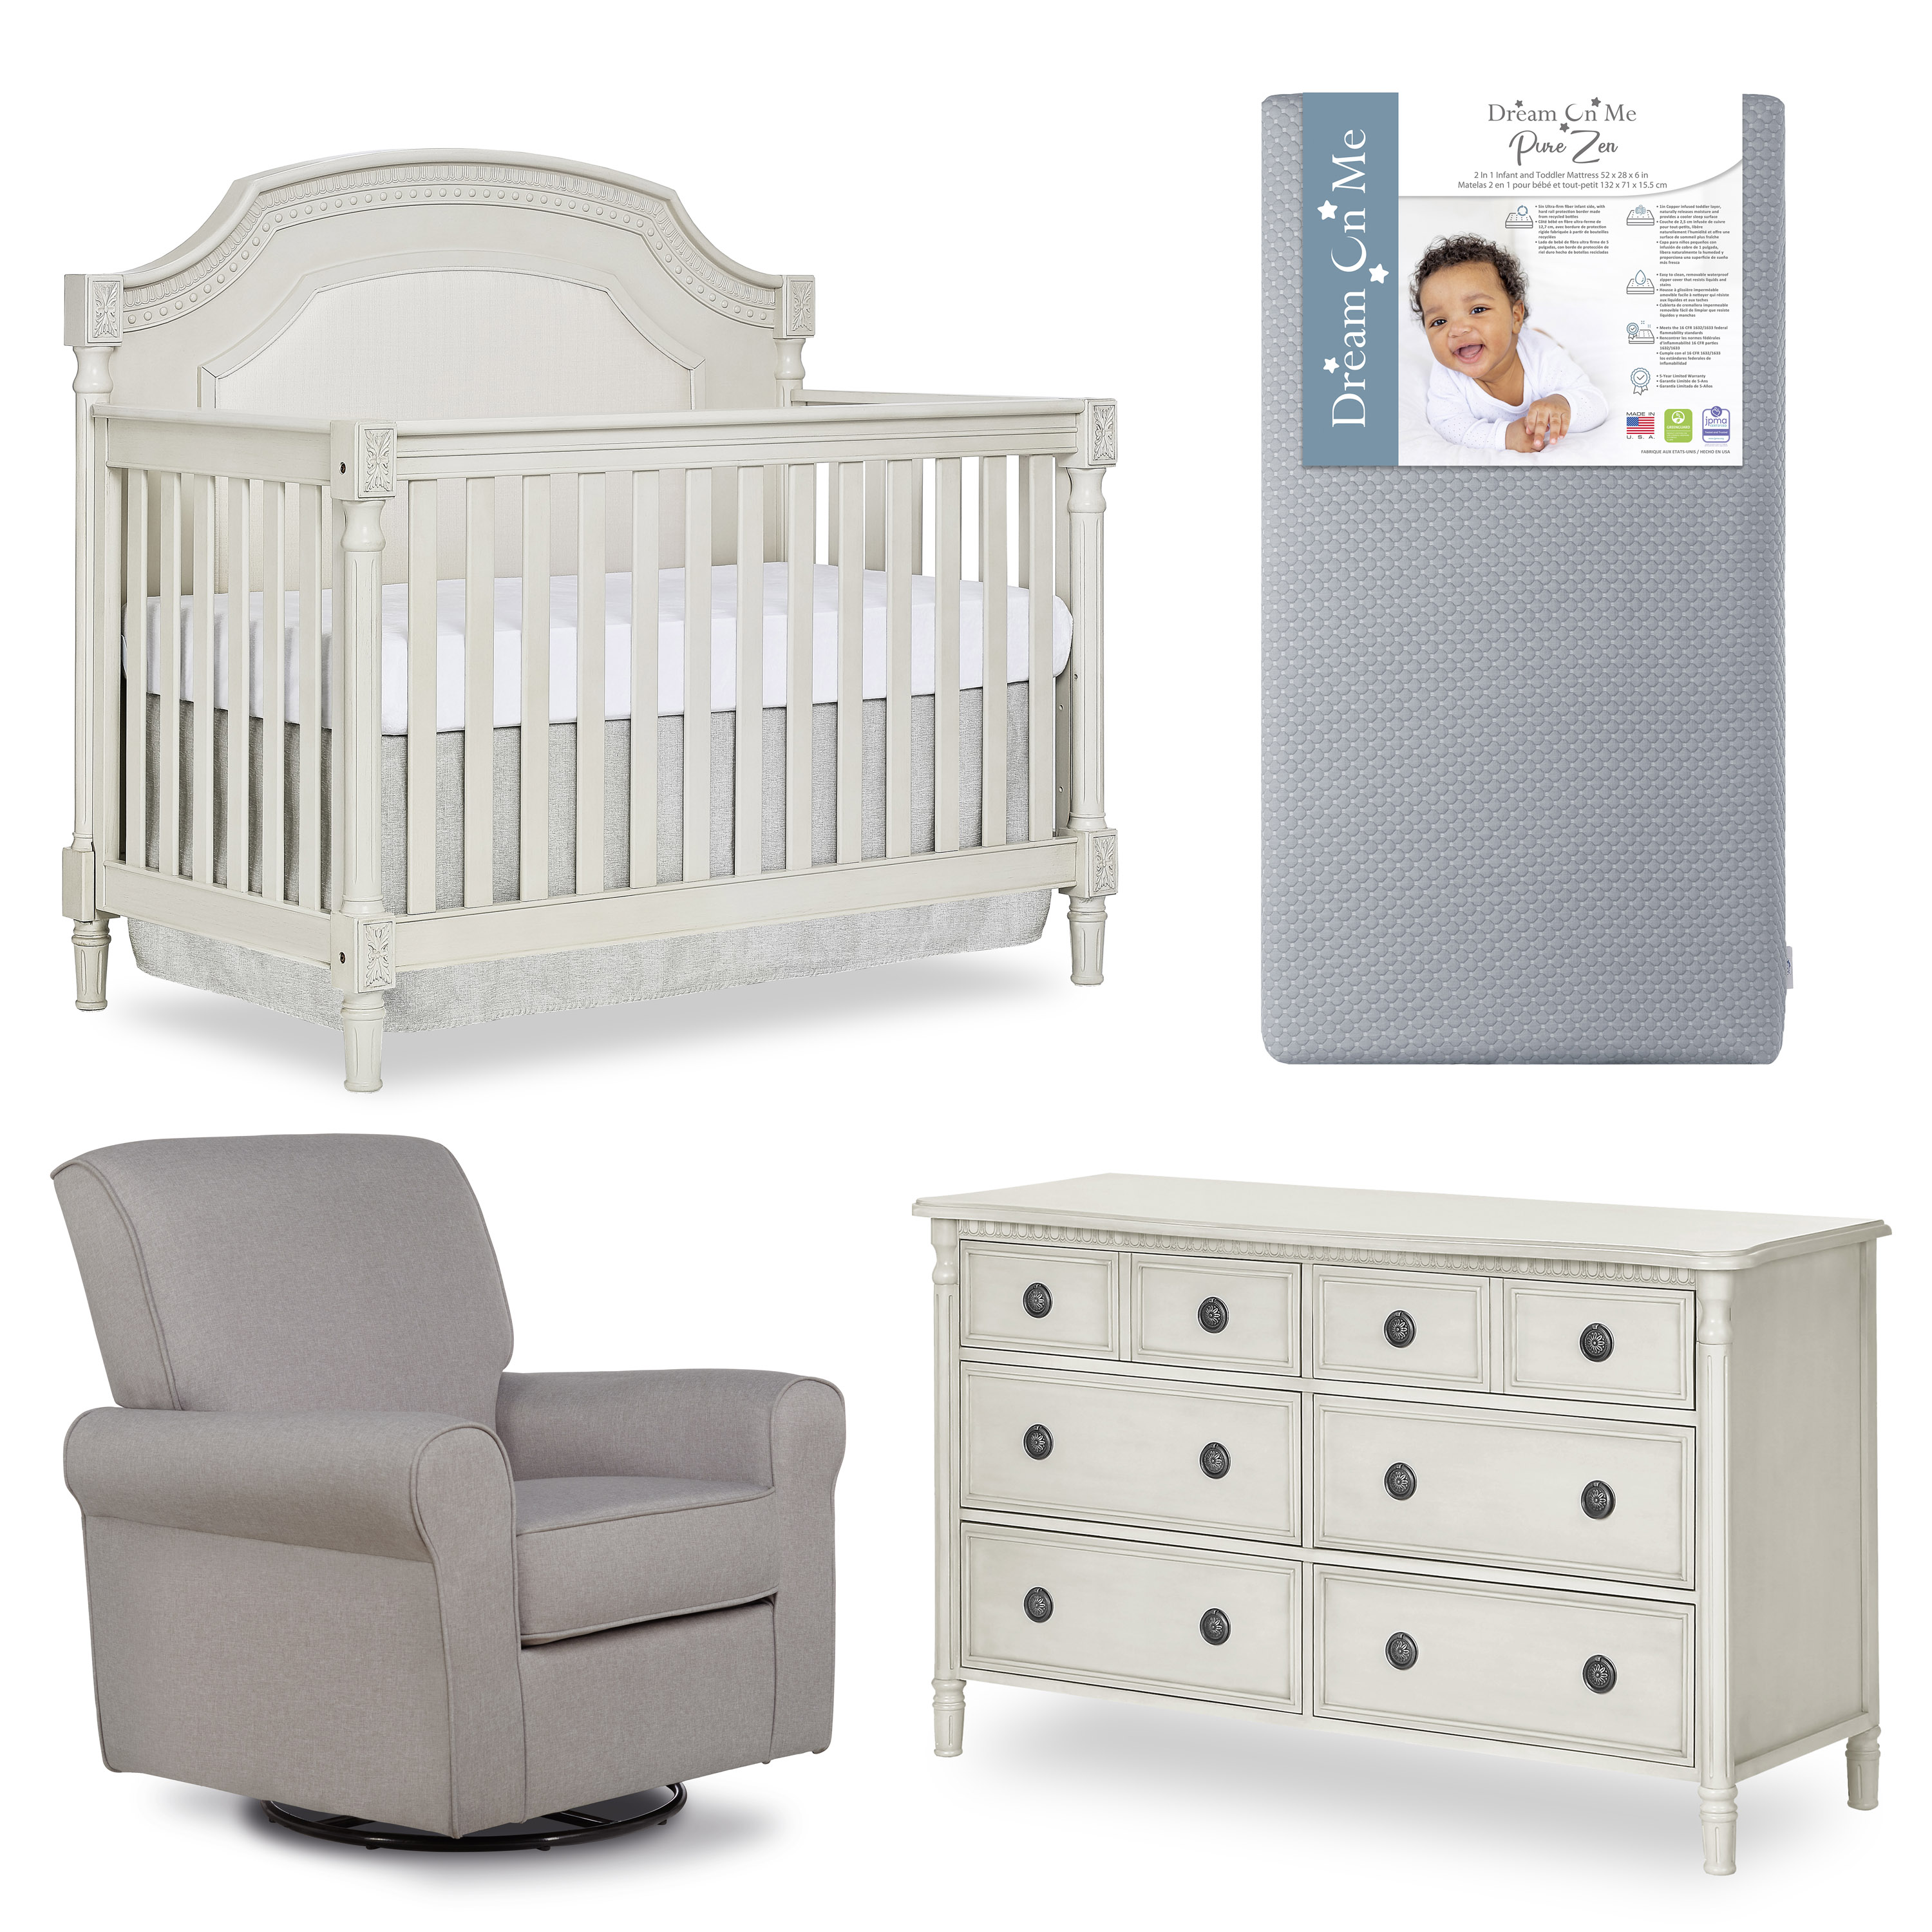 Evolur Nursery Essentials Bundle of Julienne 5-in-1 Convertible Crib, Julienne Double Dresser & London Upholstered 360 Swivel Glider, with a Premium Dream On Me Crib Mattress - image 1 of 11